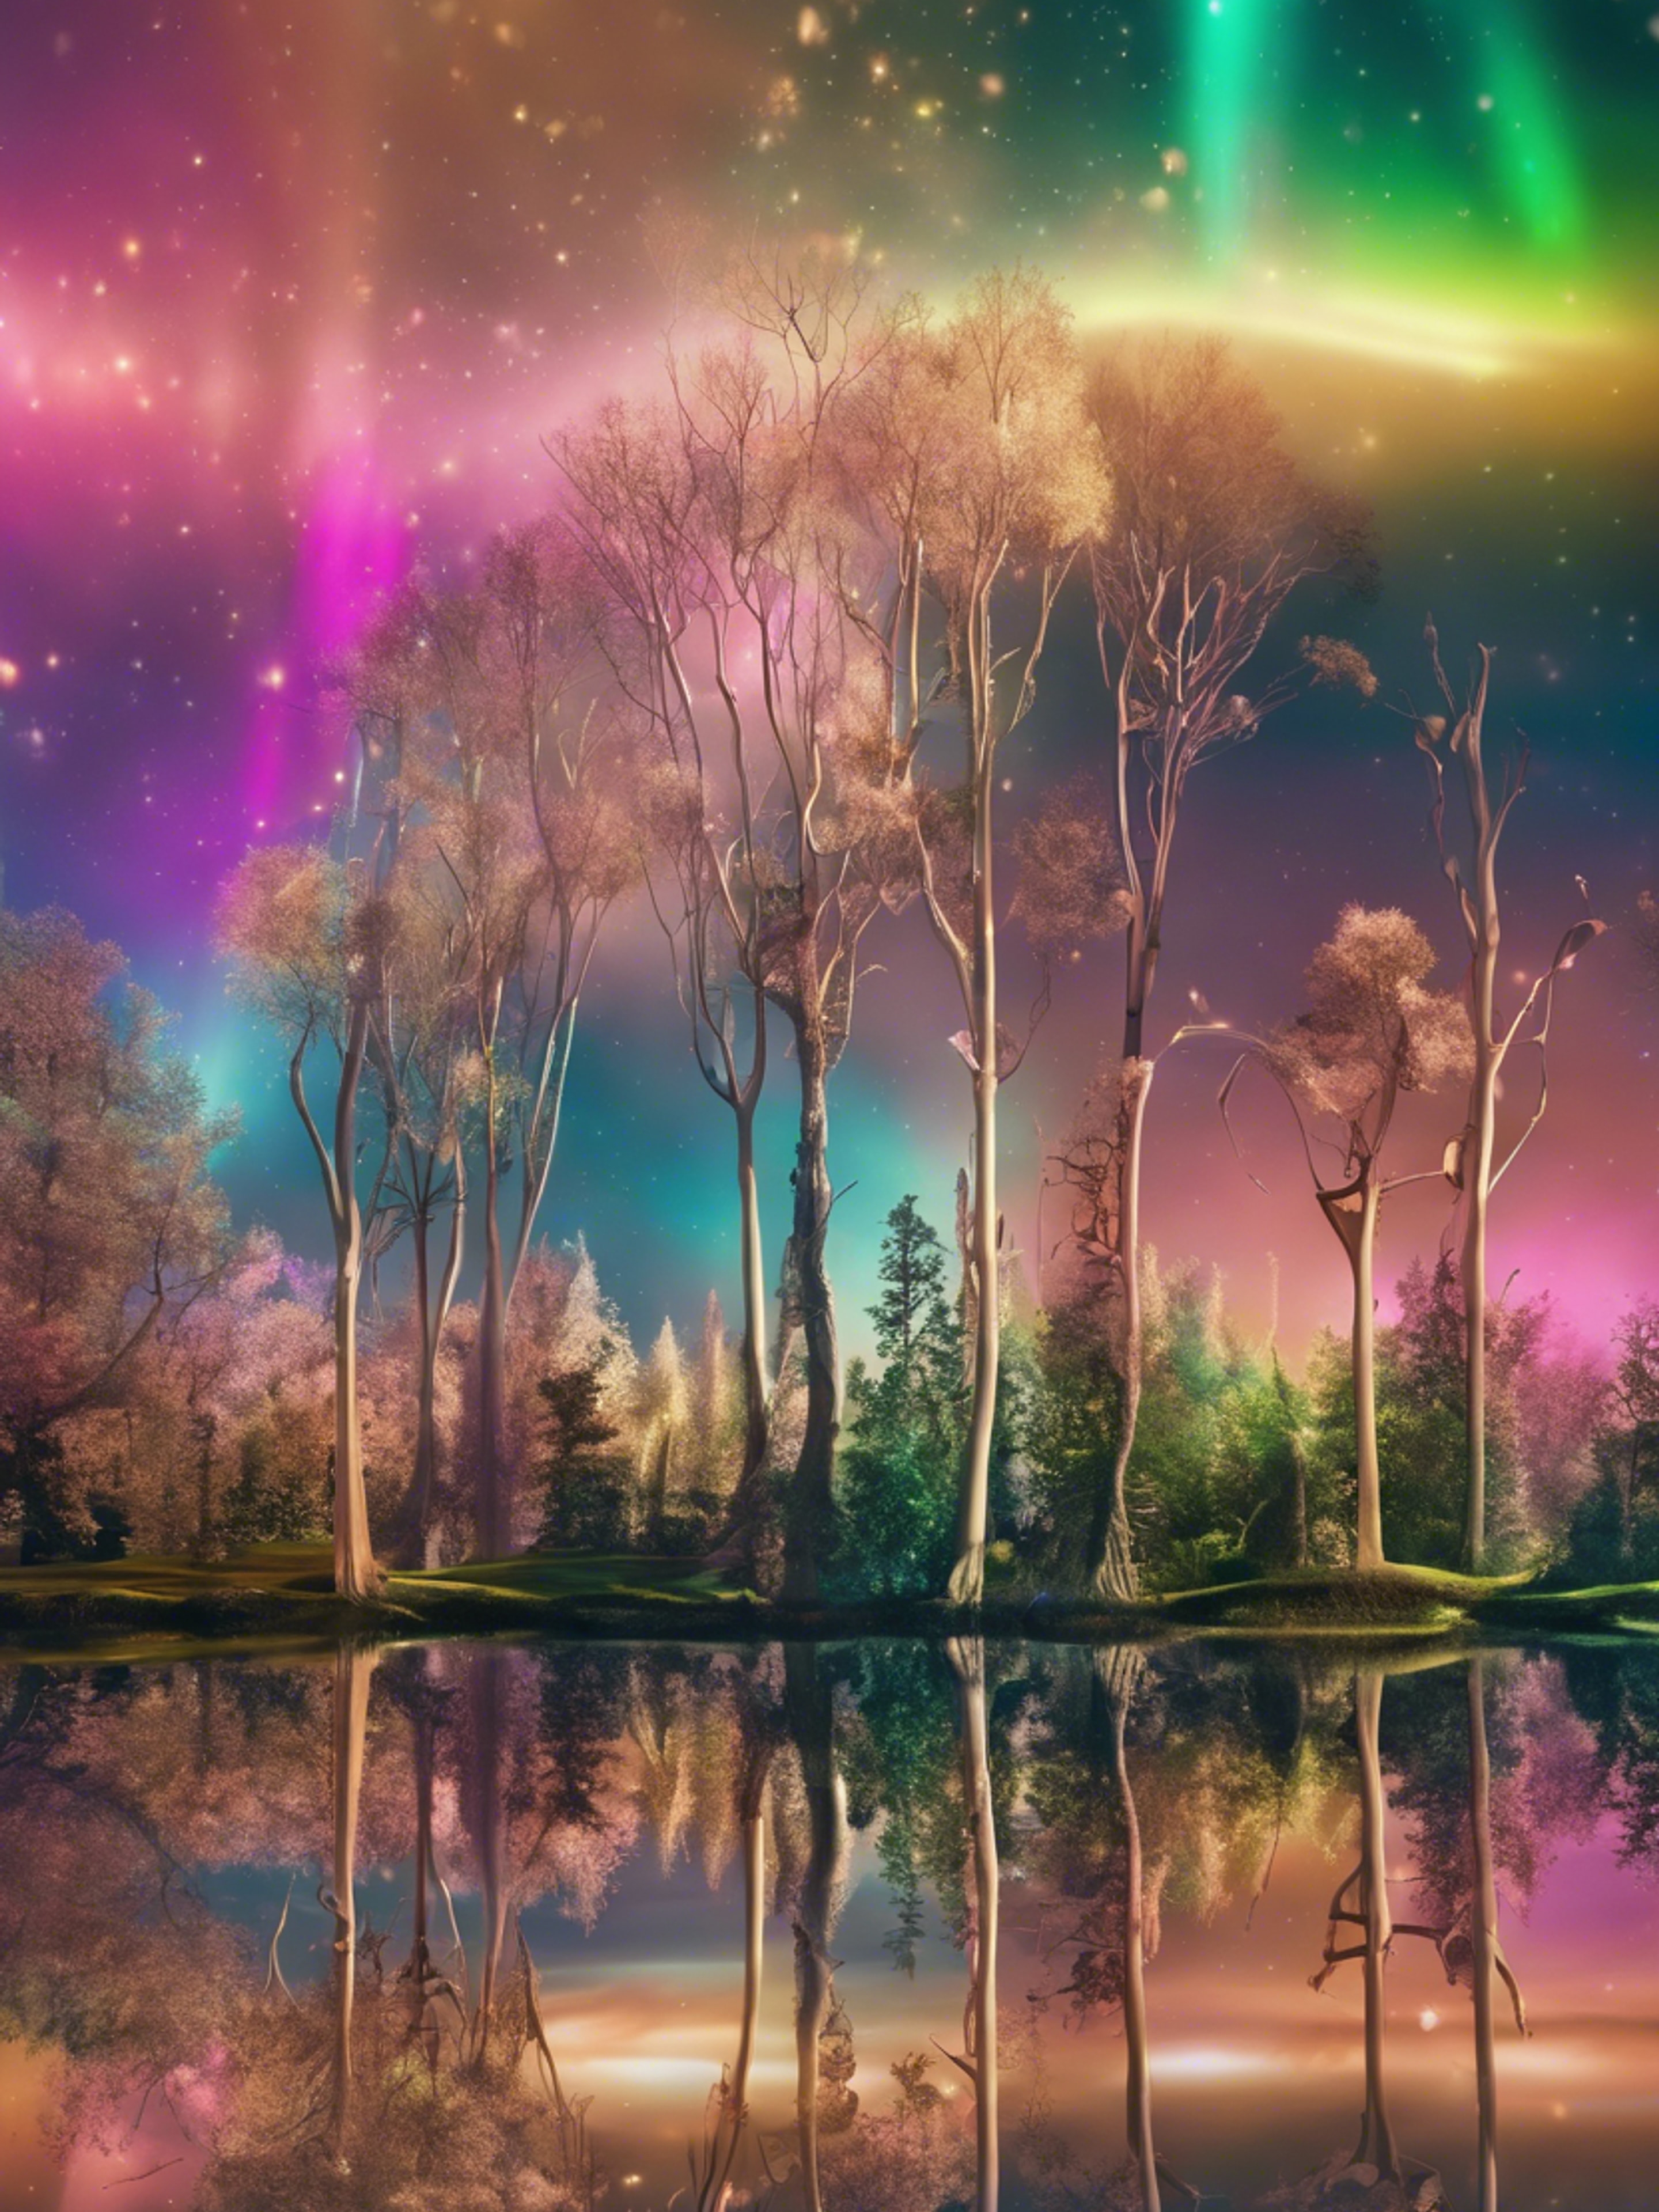 A surreal dream featuring a glass forest under a rainbow aurora sky.壁紙[55eb39c64d234d5eb704]